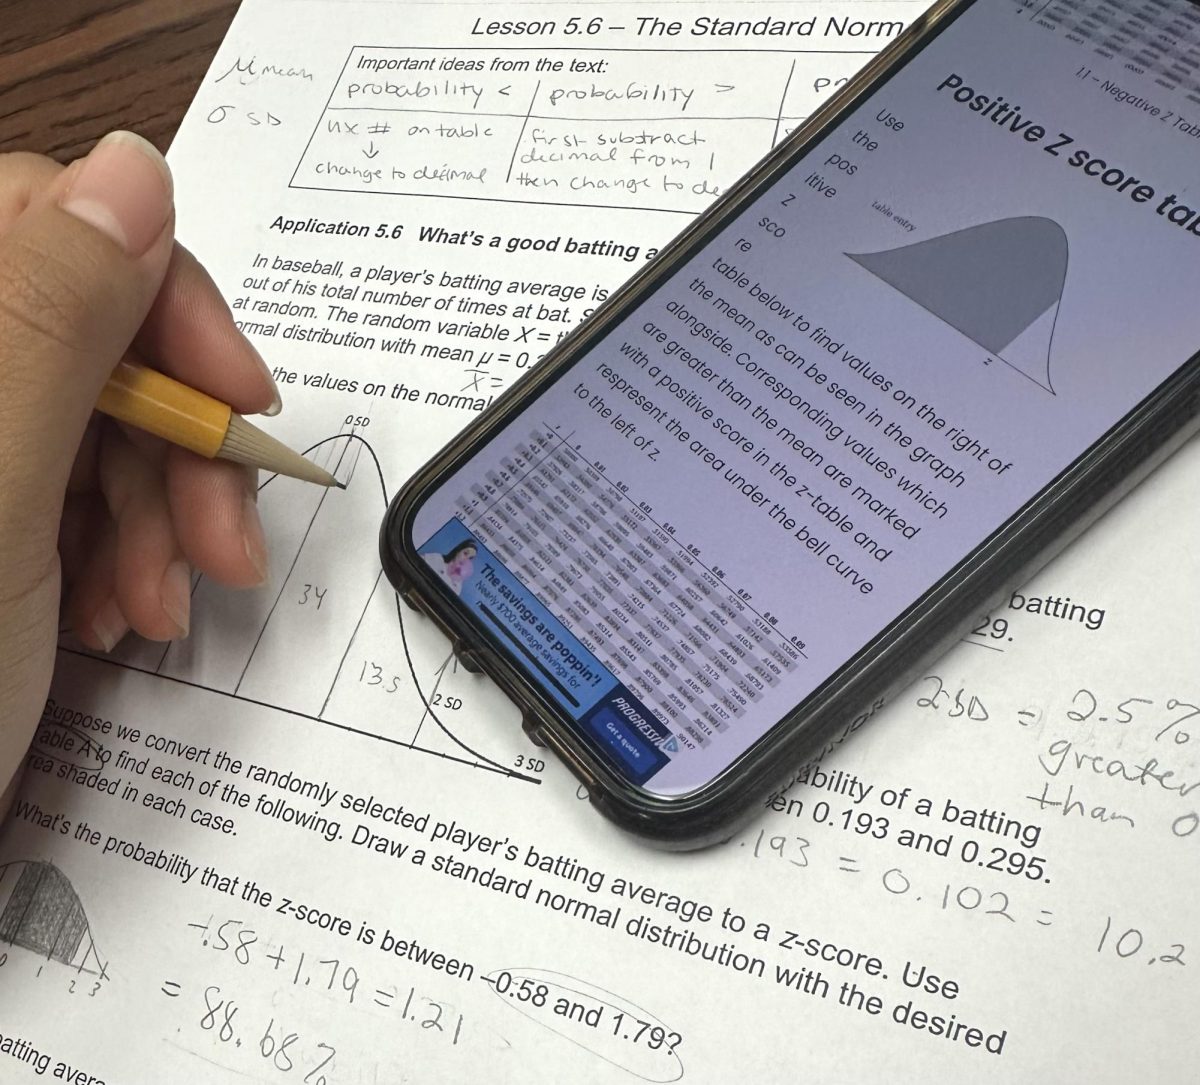 Personal devices help students complete schoolwork.